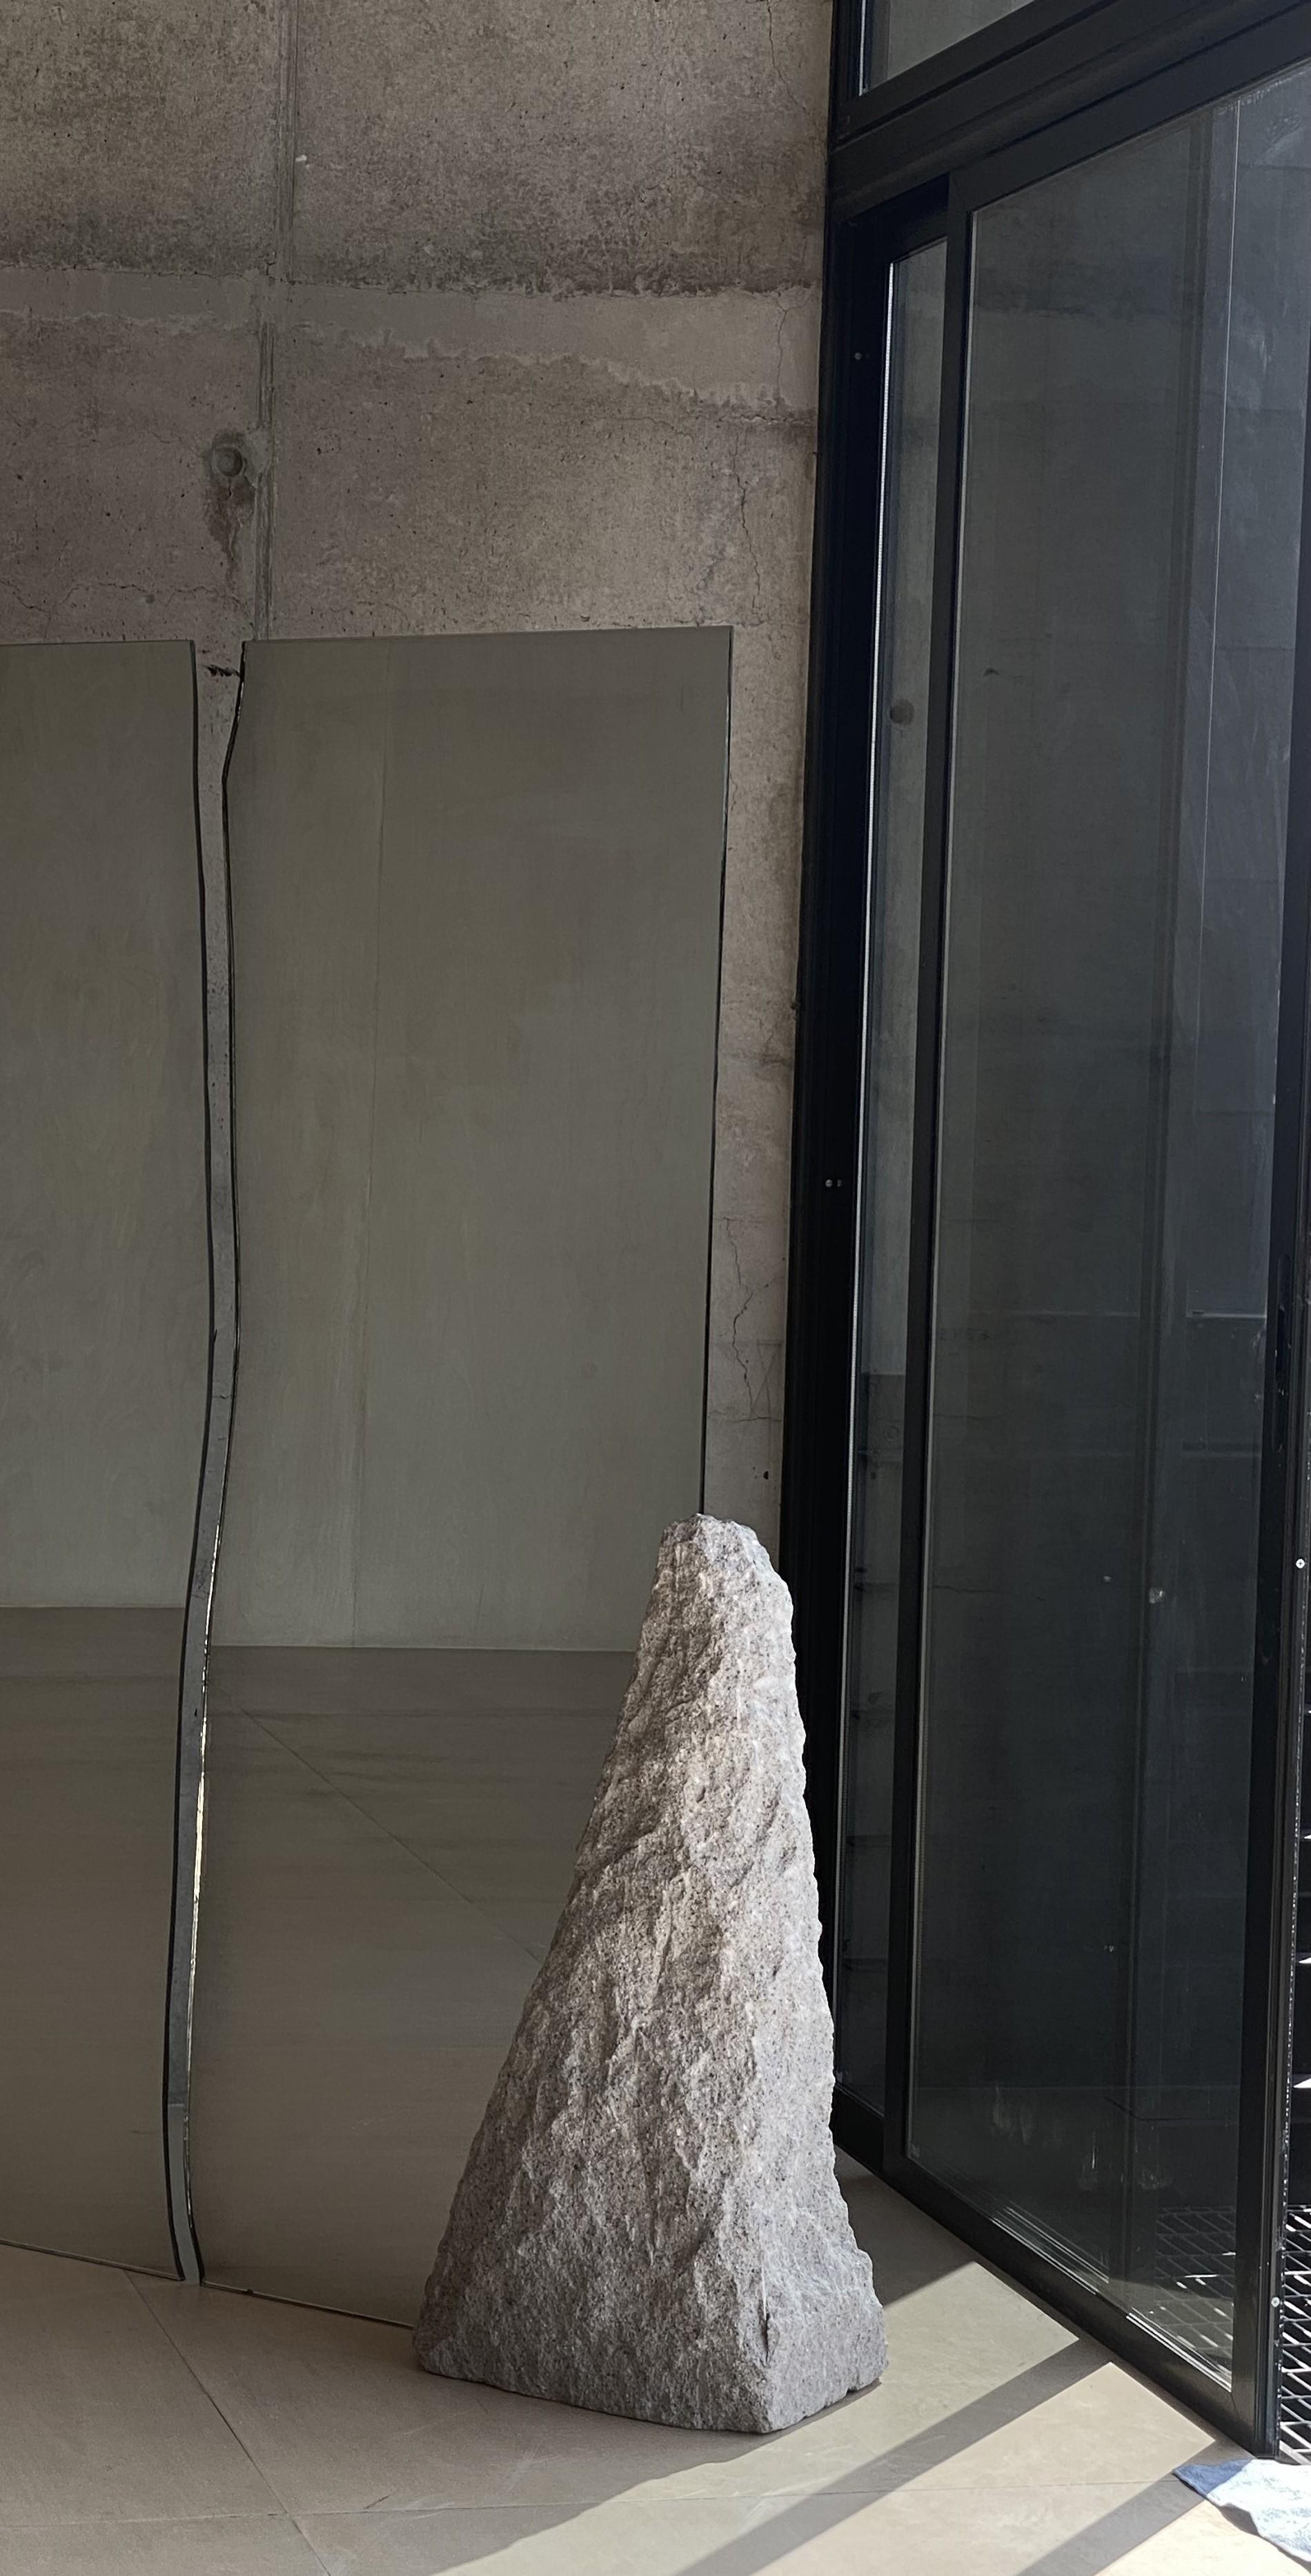 Illusio mirror by Andres Monnier
One of a Kind.
Dimensions: D 25 x W 80 x H 180 cm
Materials: white Quarry Stone


Andrés Monnier is a Mexican artist born in Guadalajara but based in Ensenada. his purpose is to create sculptural pieces to express